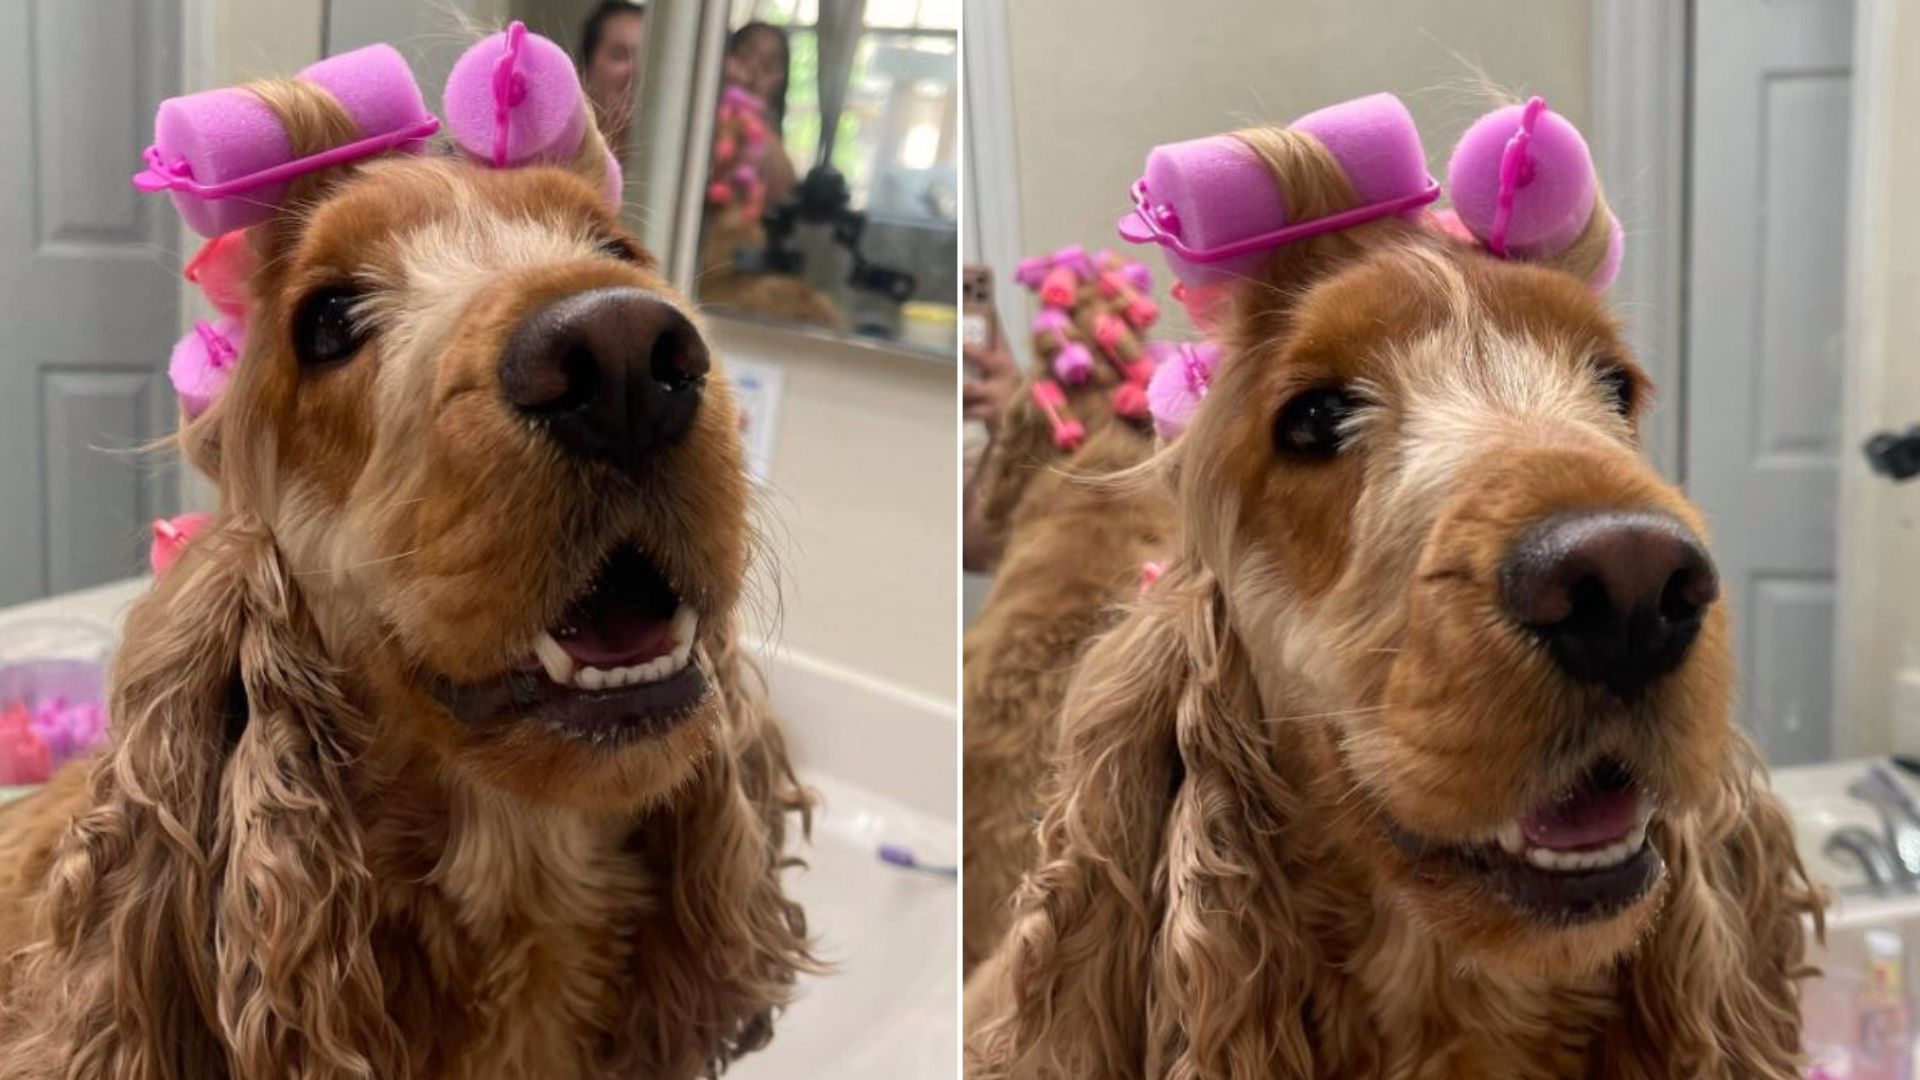 Dog With Legendary Locks Pulls Off Every Hairstyle In The Book